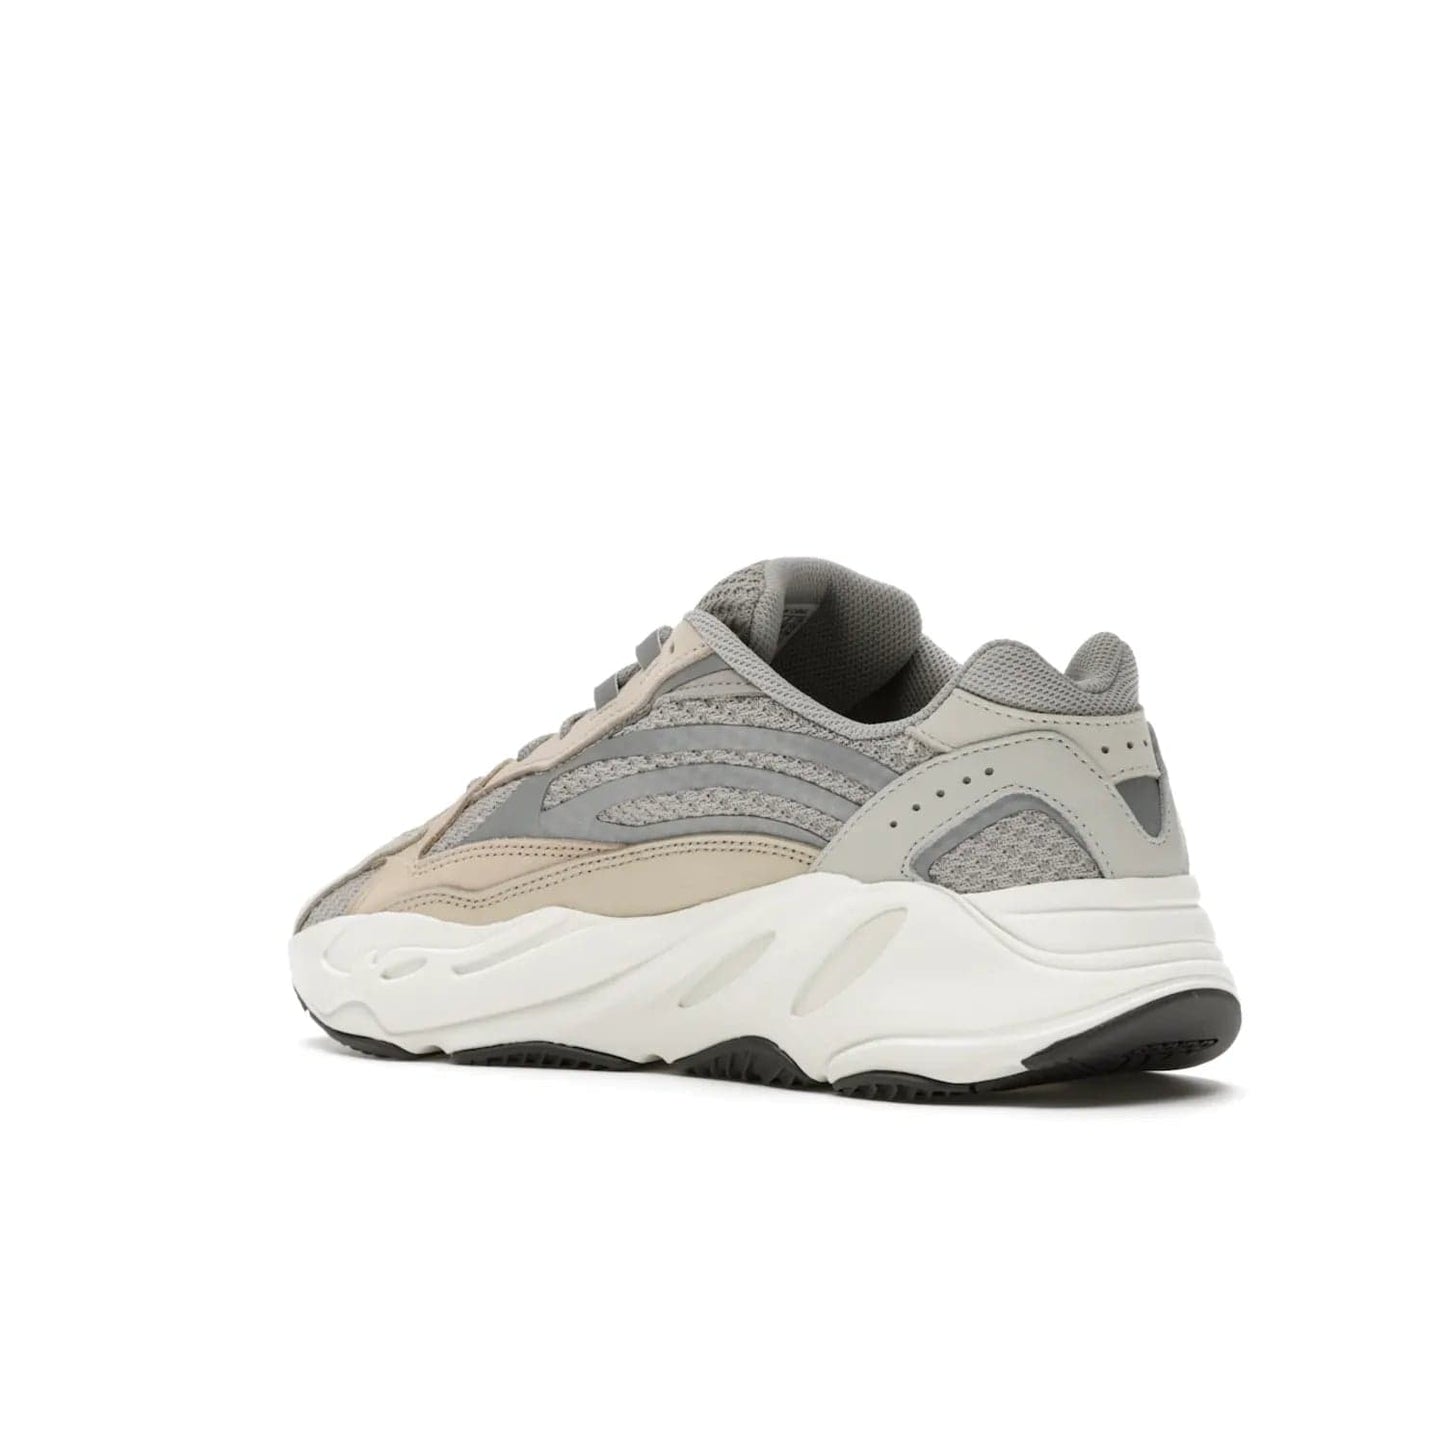 adidas Yeezy Boost 700 V2 Cream - Image 23 - Only at www.BallersClubKickz.com - Add style and luxury to your wardrobe with the adidas Yeezy 700 V2 Cream. Featuring a unique reflective upper, leather overlays, mesh underlays and the signature BOOST midsole, this silhouette is perfect for any stylish wardrobe.